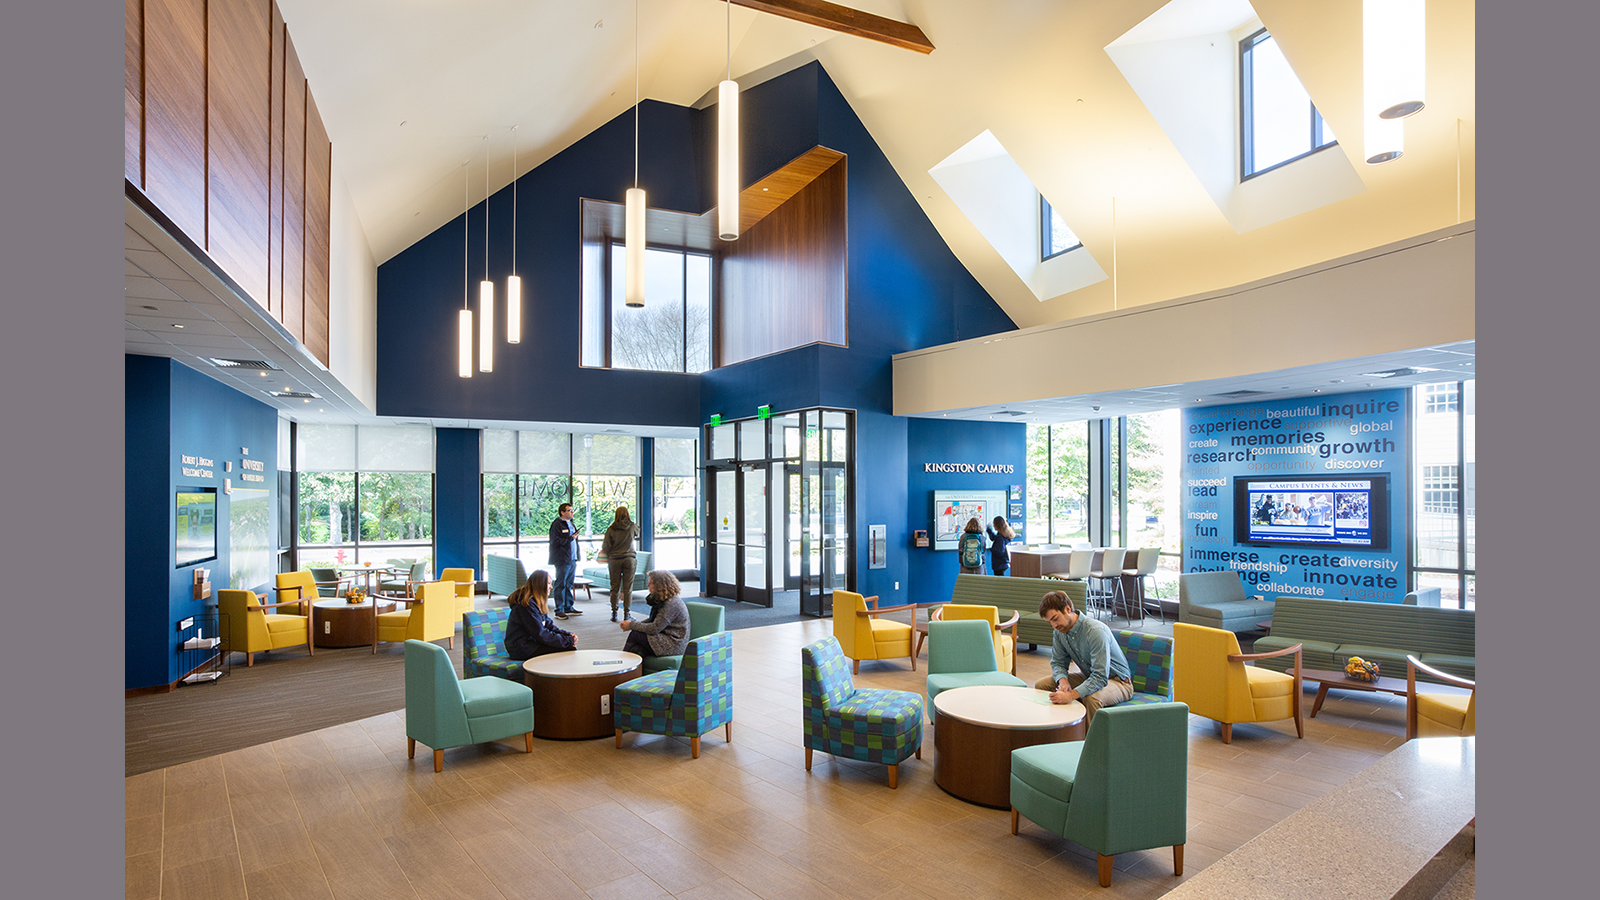 Uri Welcome center Interior lobby, view looking outward